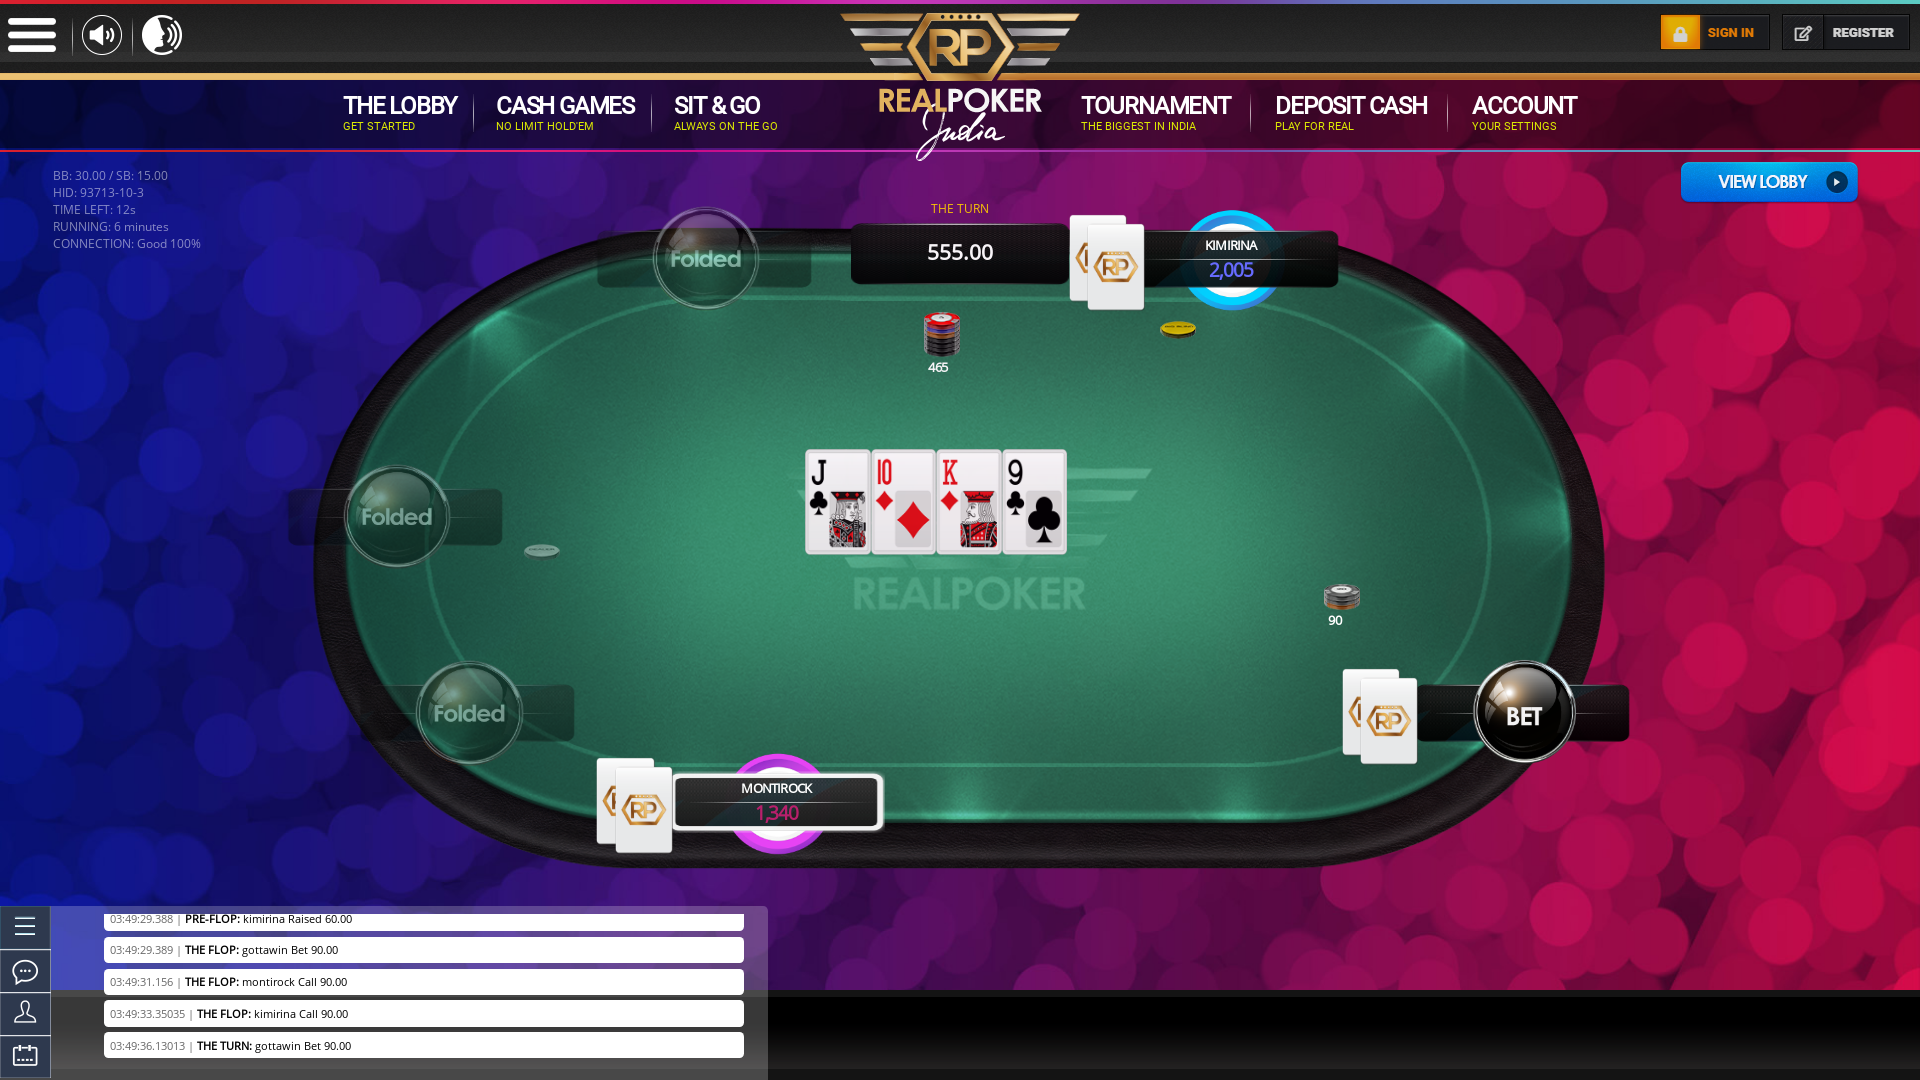 Real poker 10 player table in the 5th minute of the match